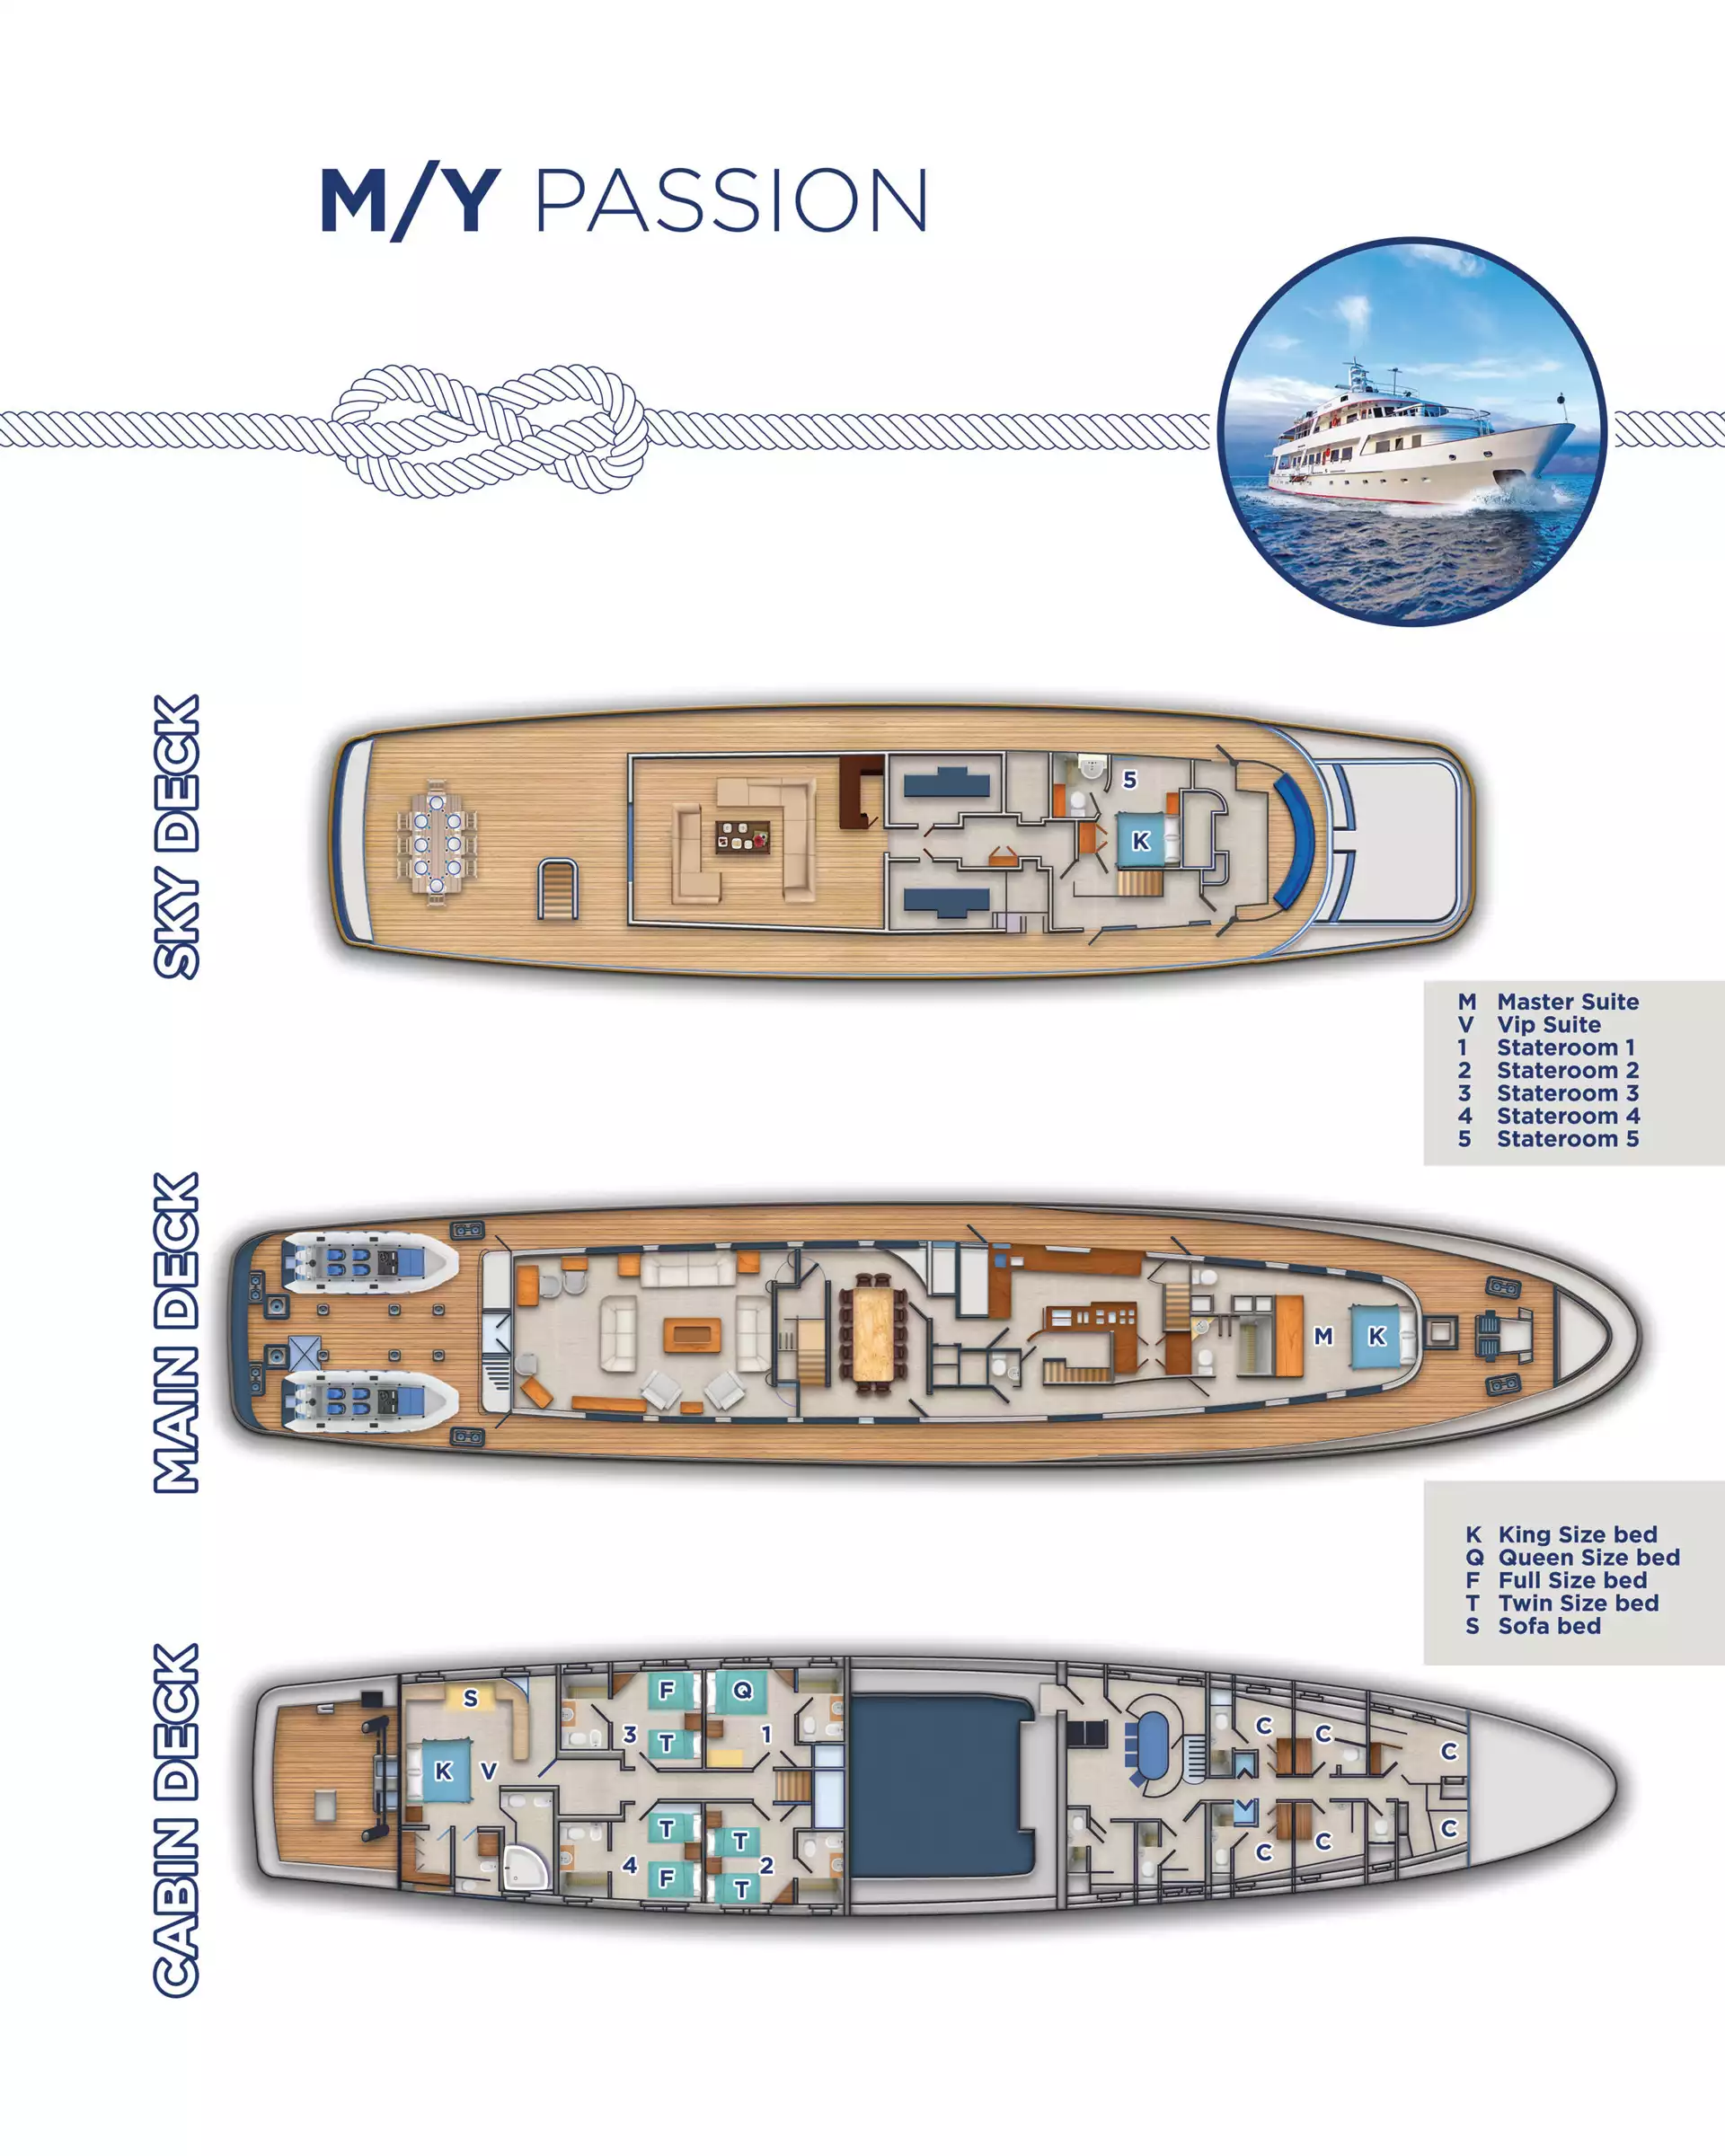 Deck plan showing 3 decks of Galapagos luxury yacht Passion with cabins & social spaces labeled.